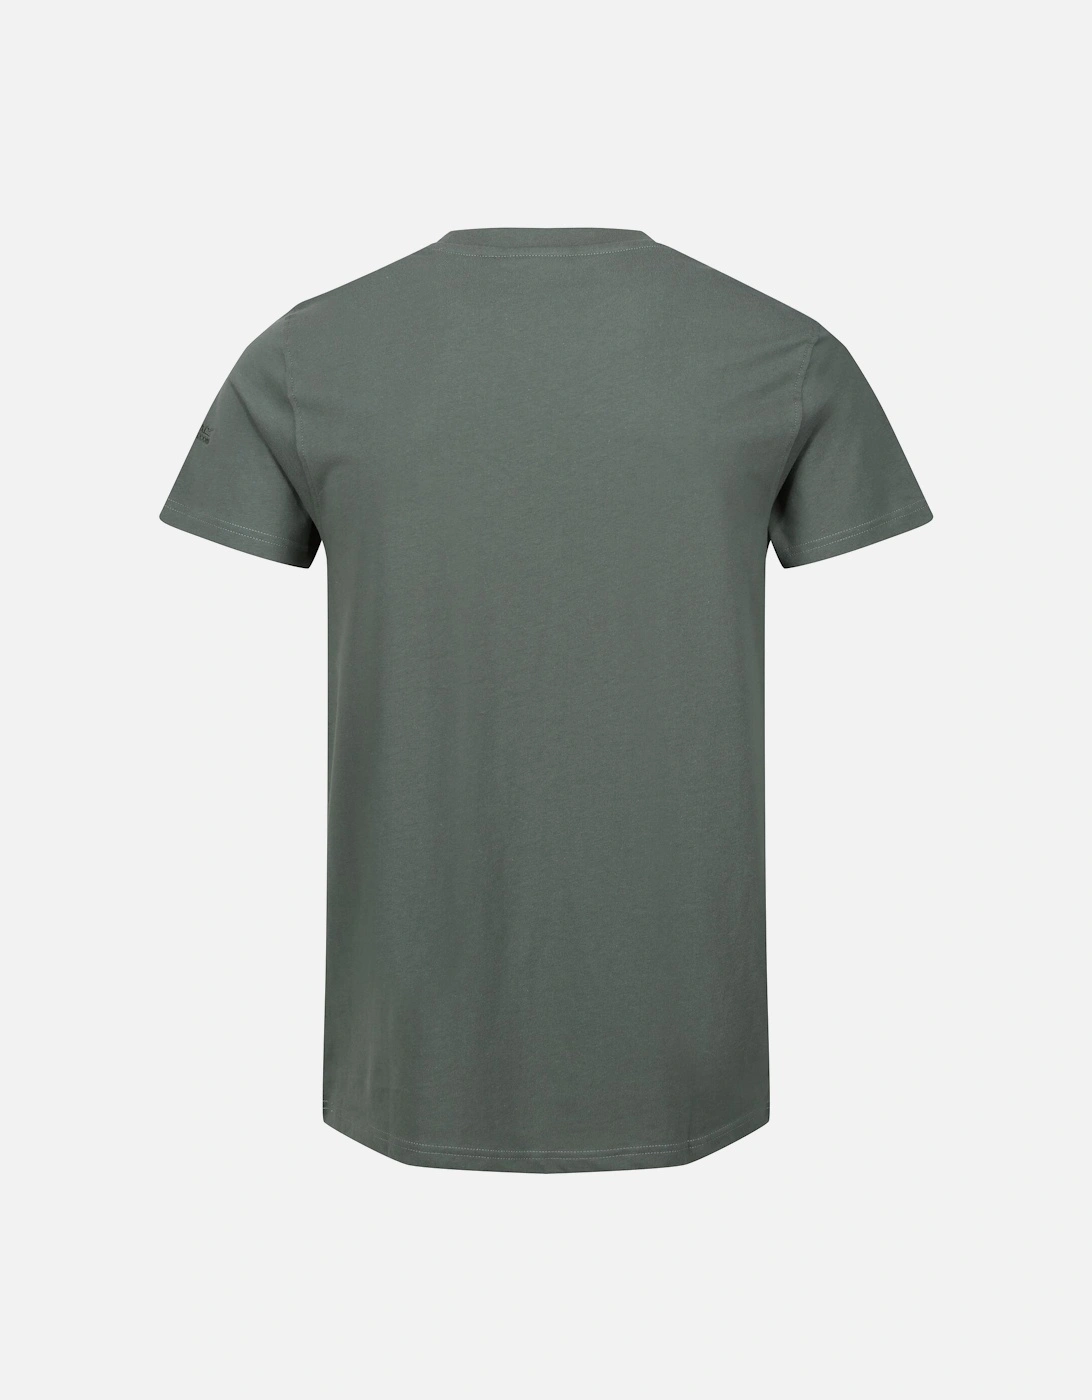 Mens Cline VII Mountain Coolweave T-Shirt